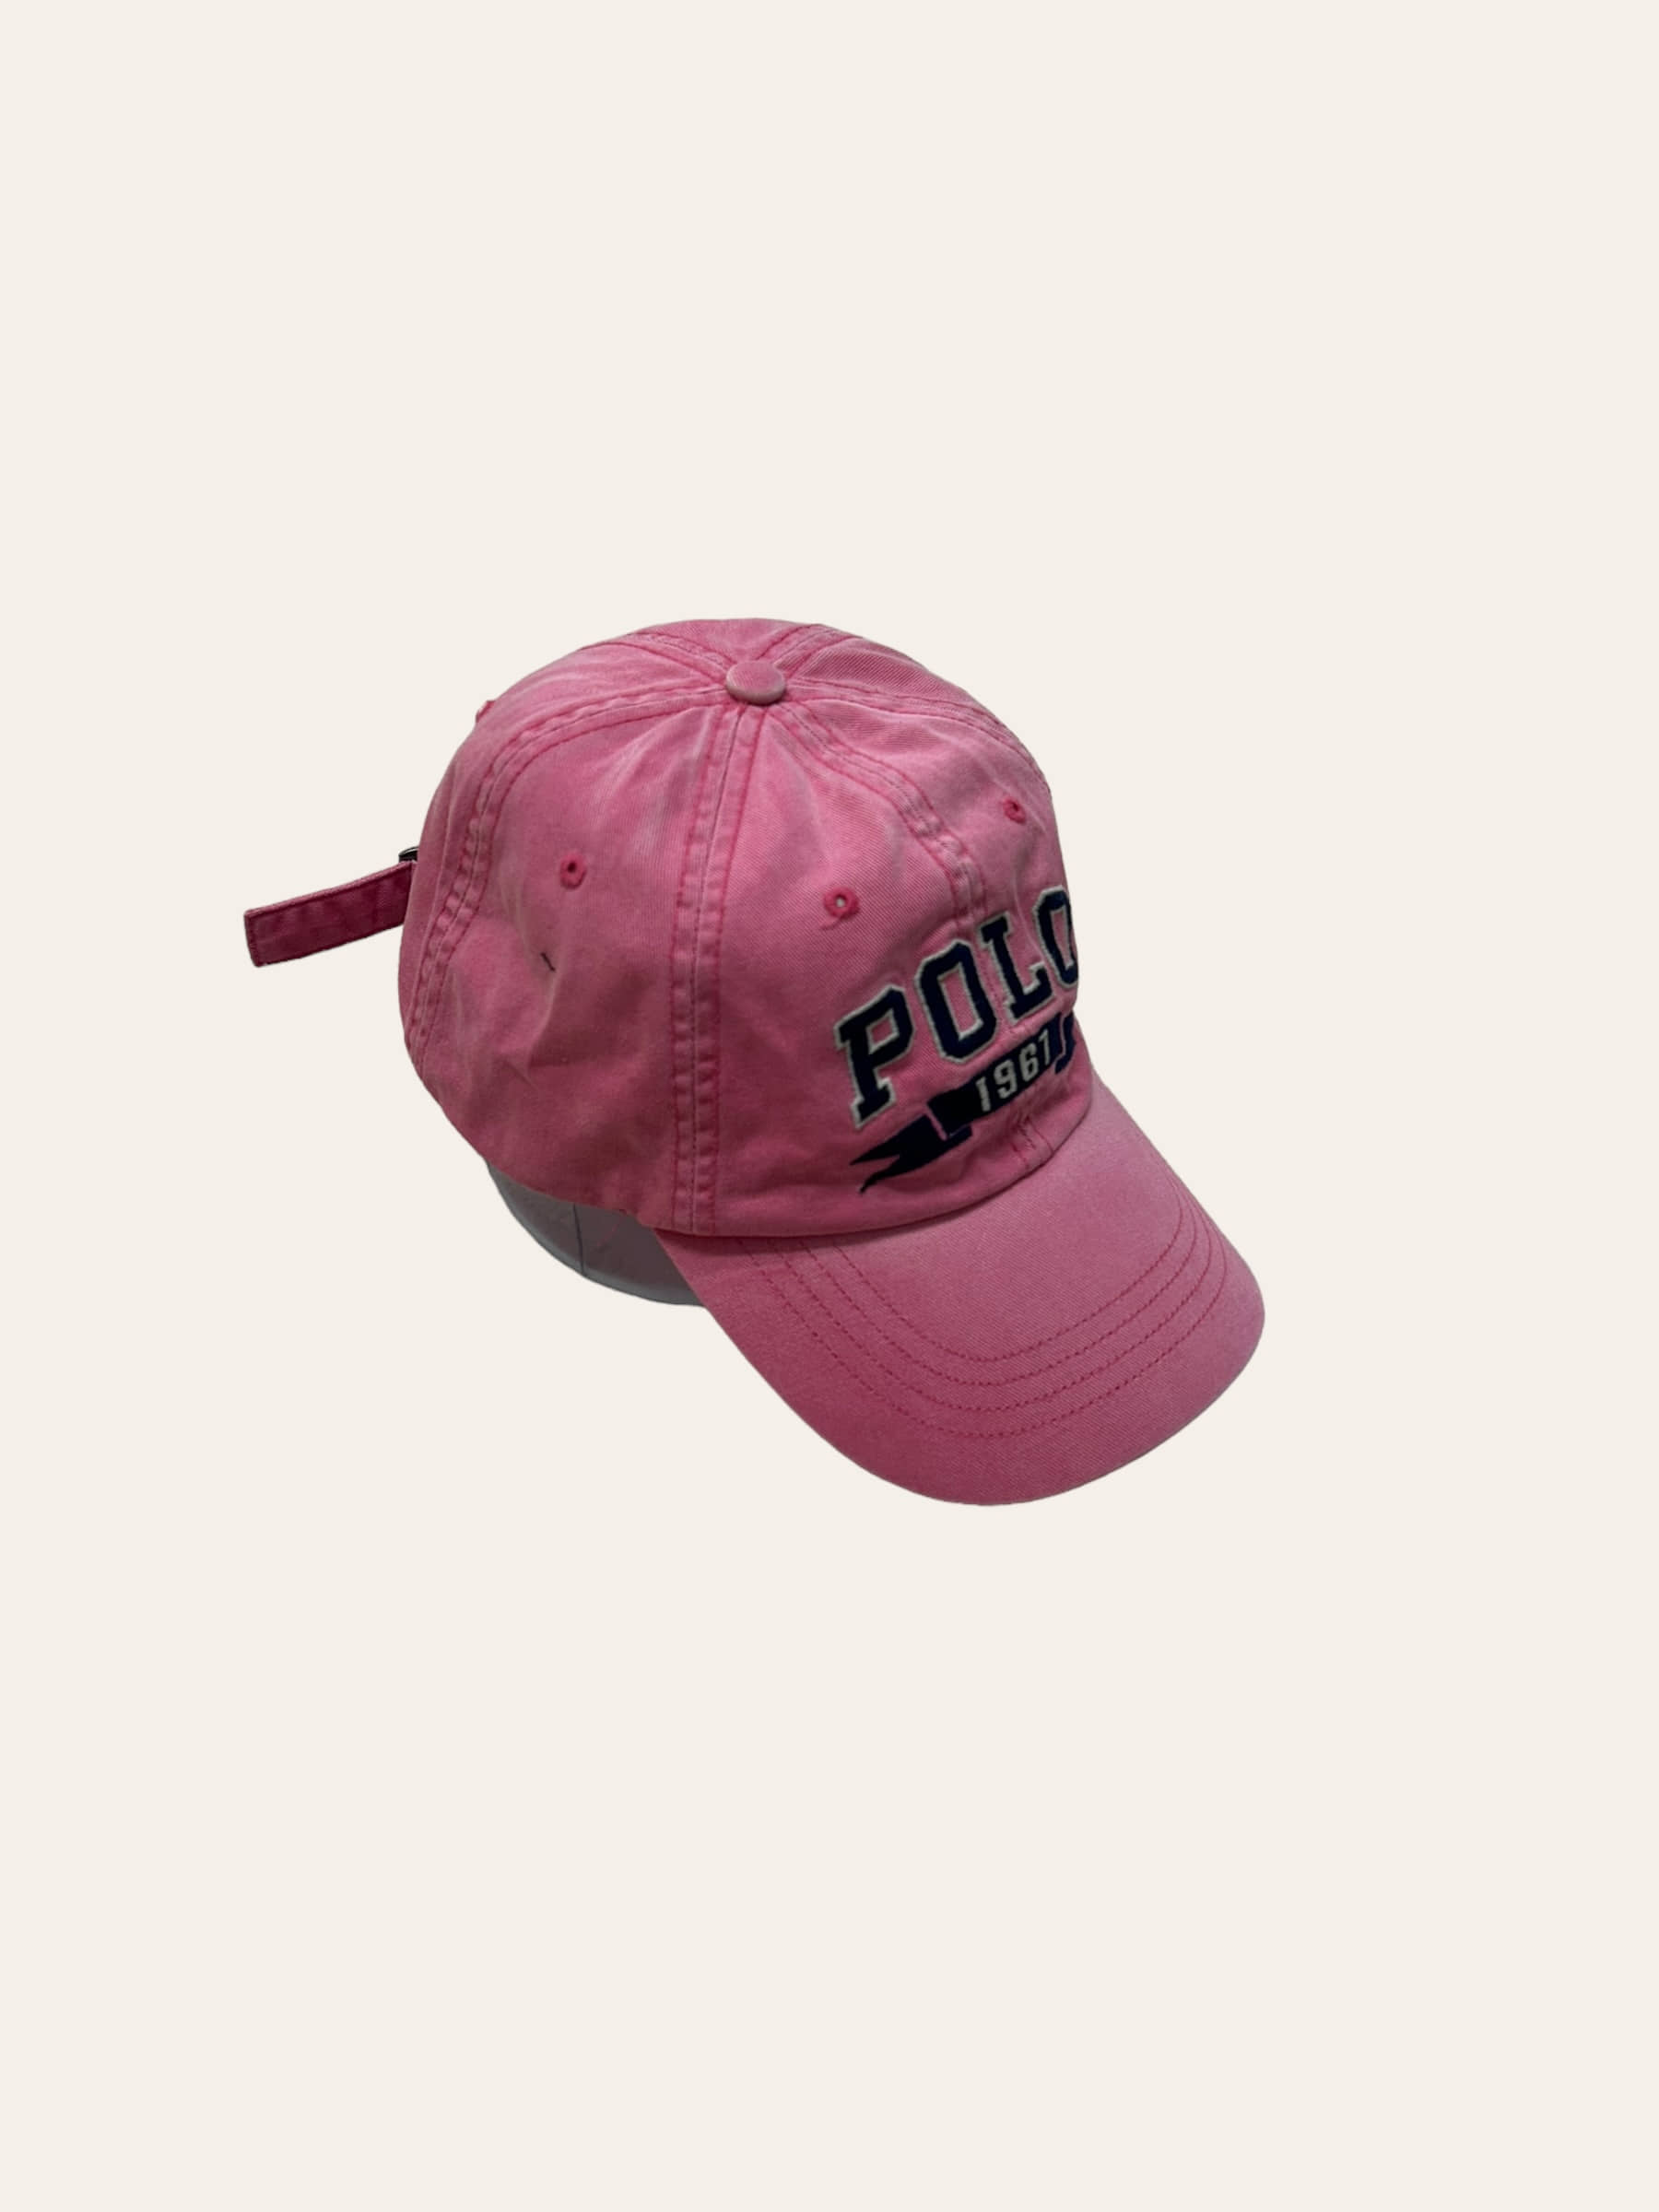 Polo ralph lauren coral pink spell out cap